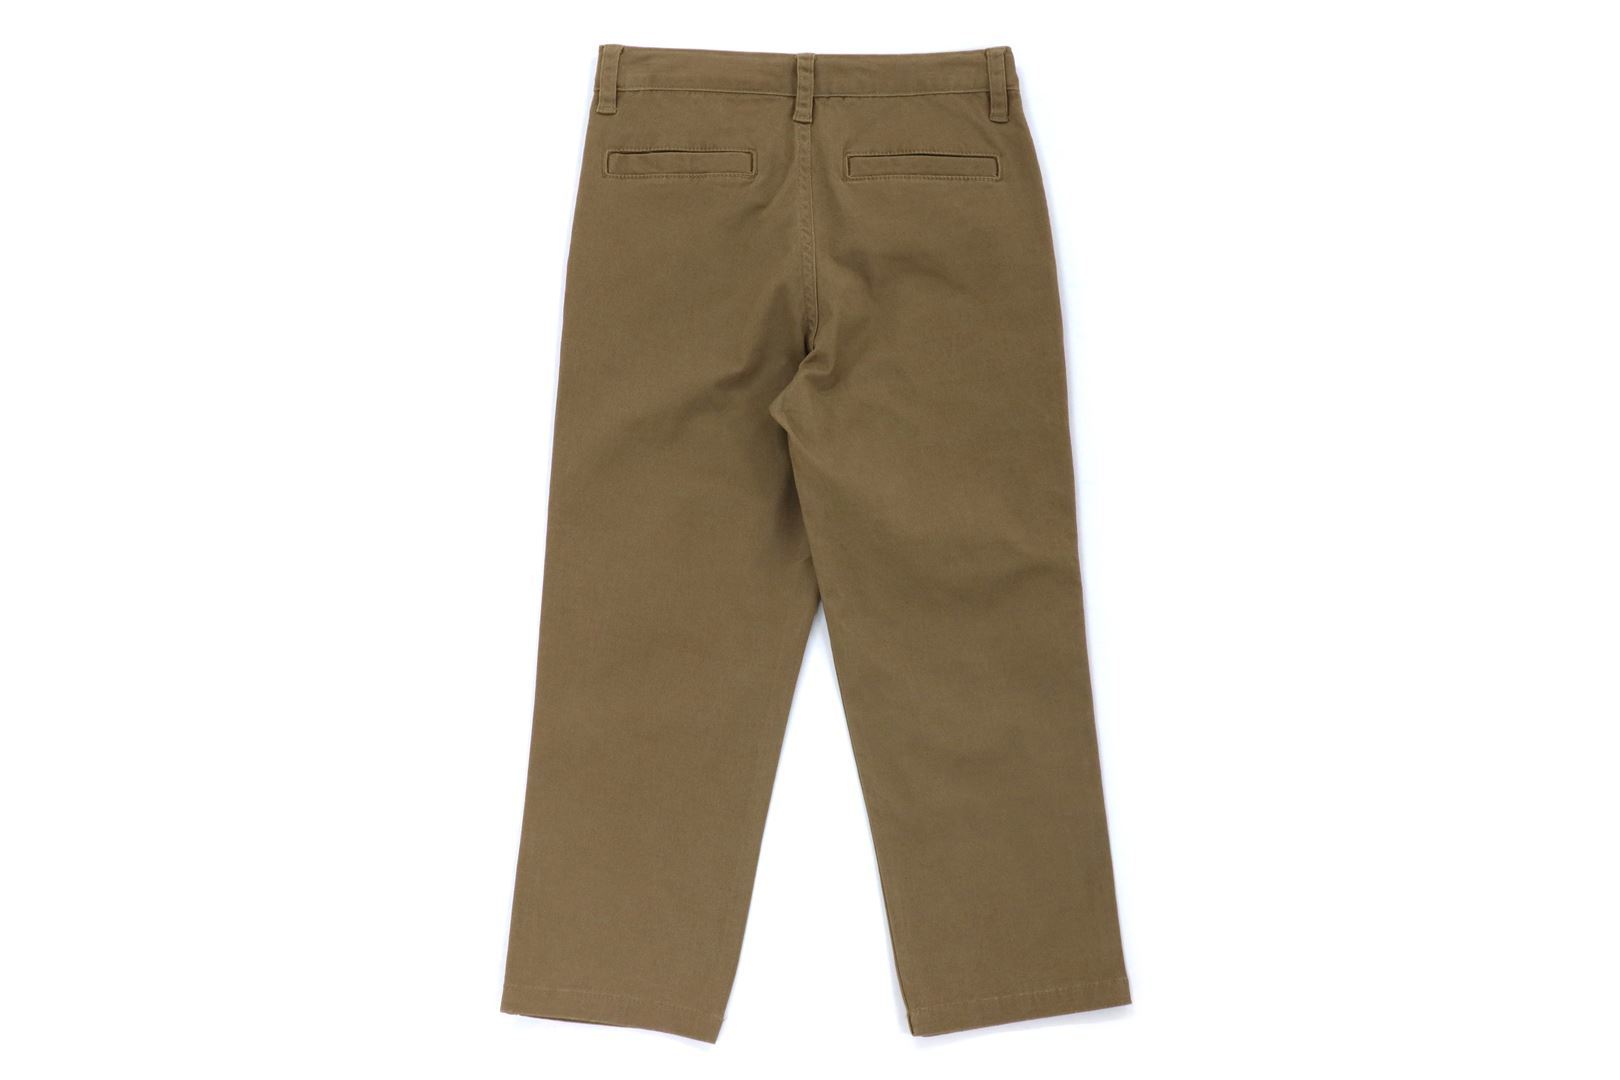 PATCHED CHINO PANTS_a0174495_13422724.jpg